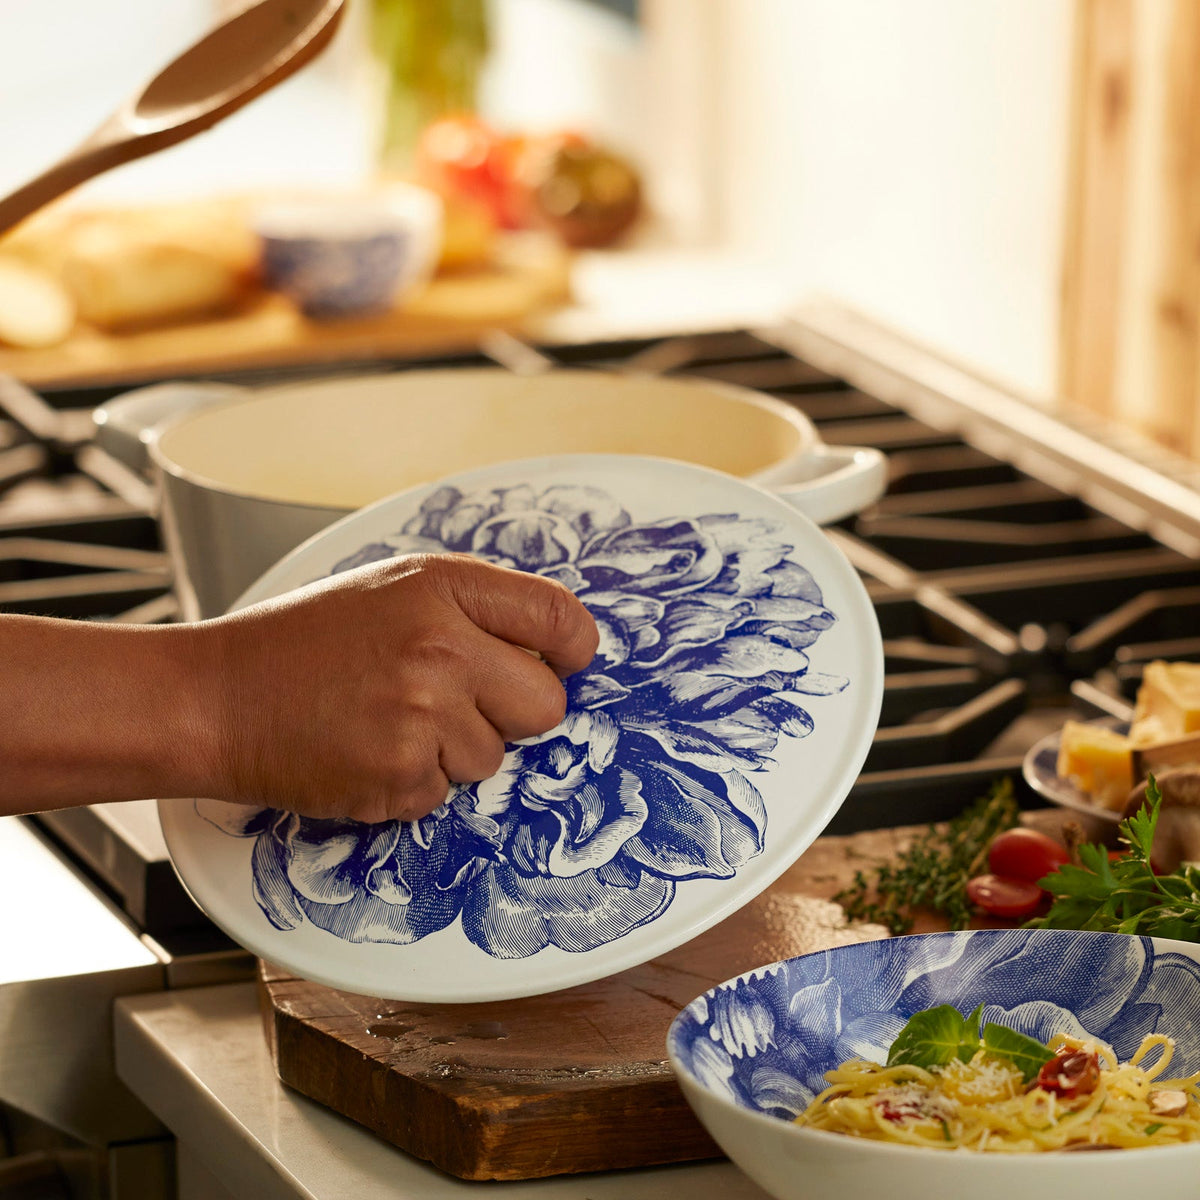 Caskata Peony Cast Iron Enamel Round Casserole with lid in Classic Blue and White from the Caskata X Cuisinart Limited Edition Collection